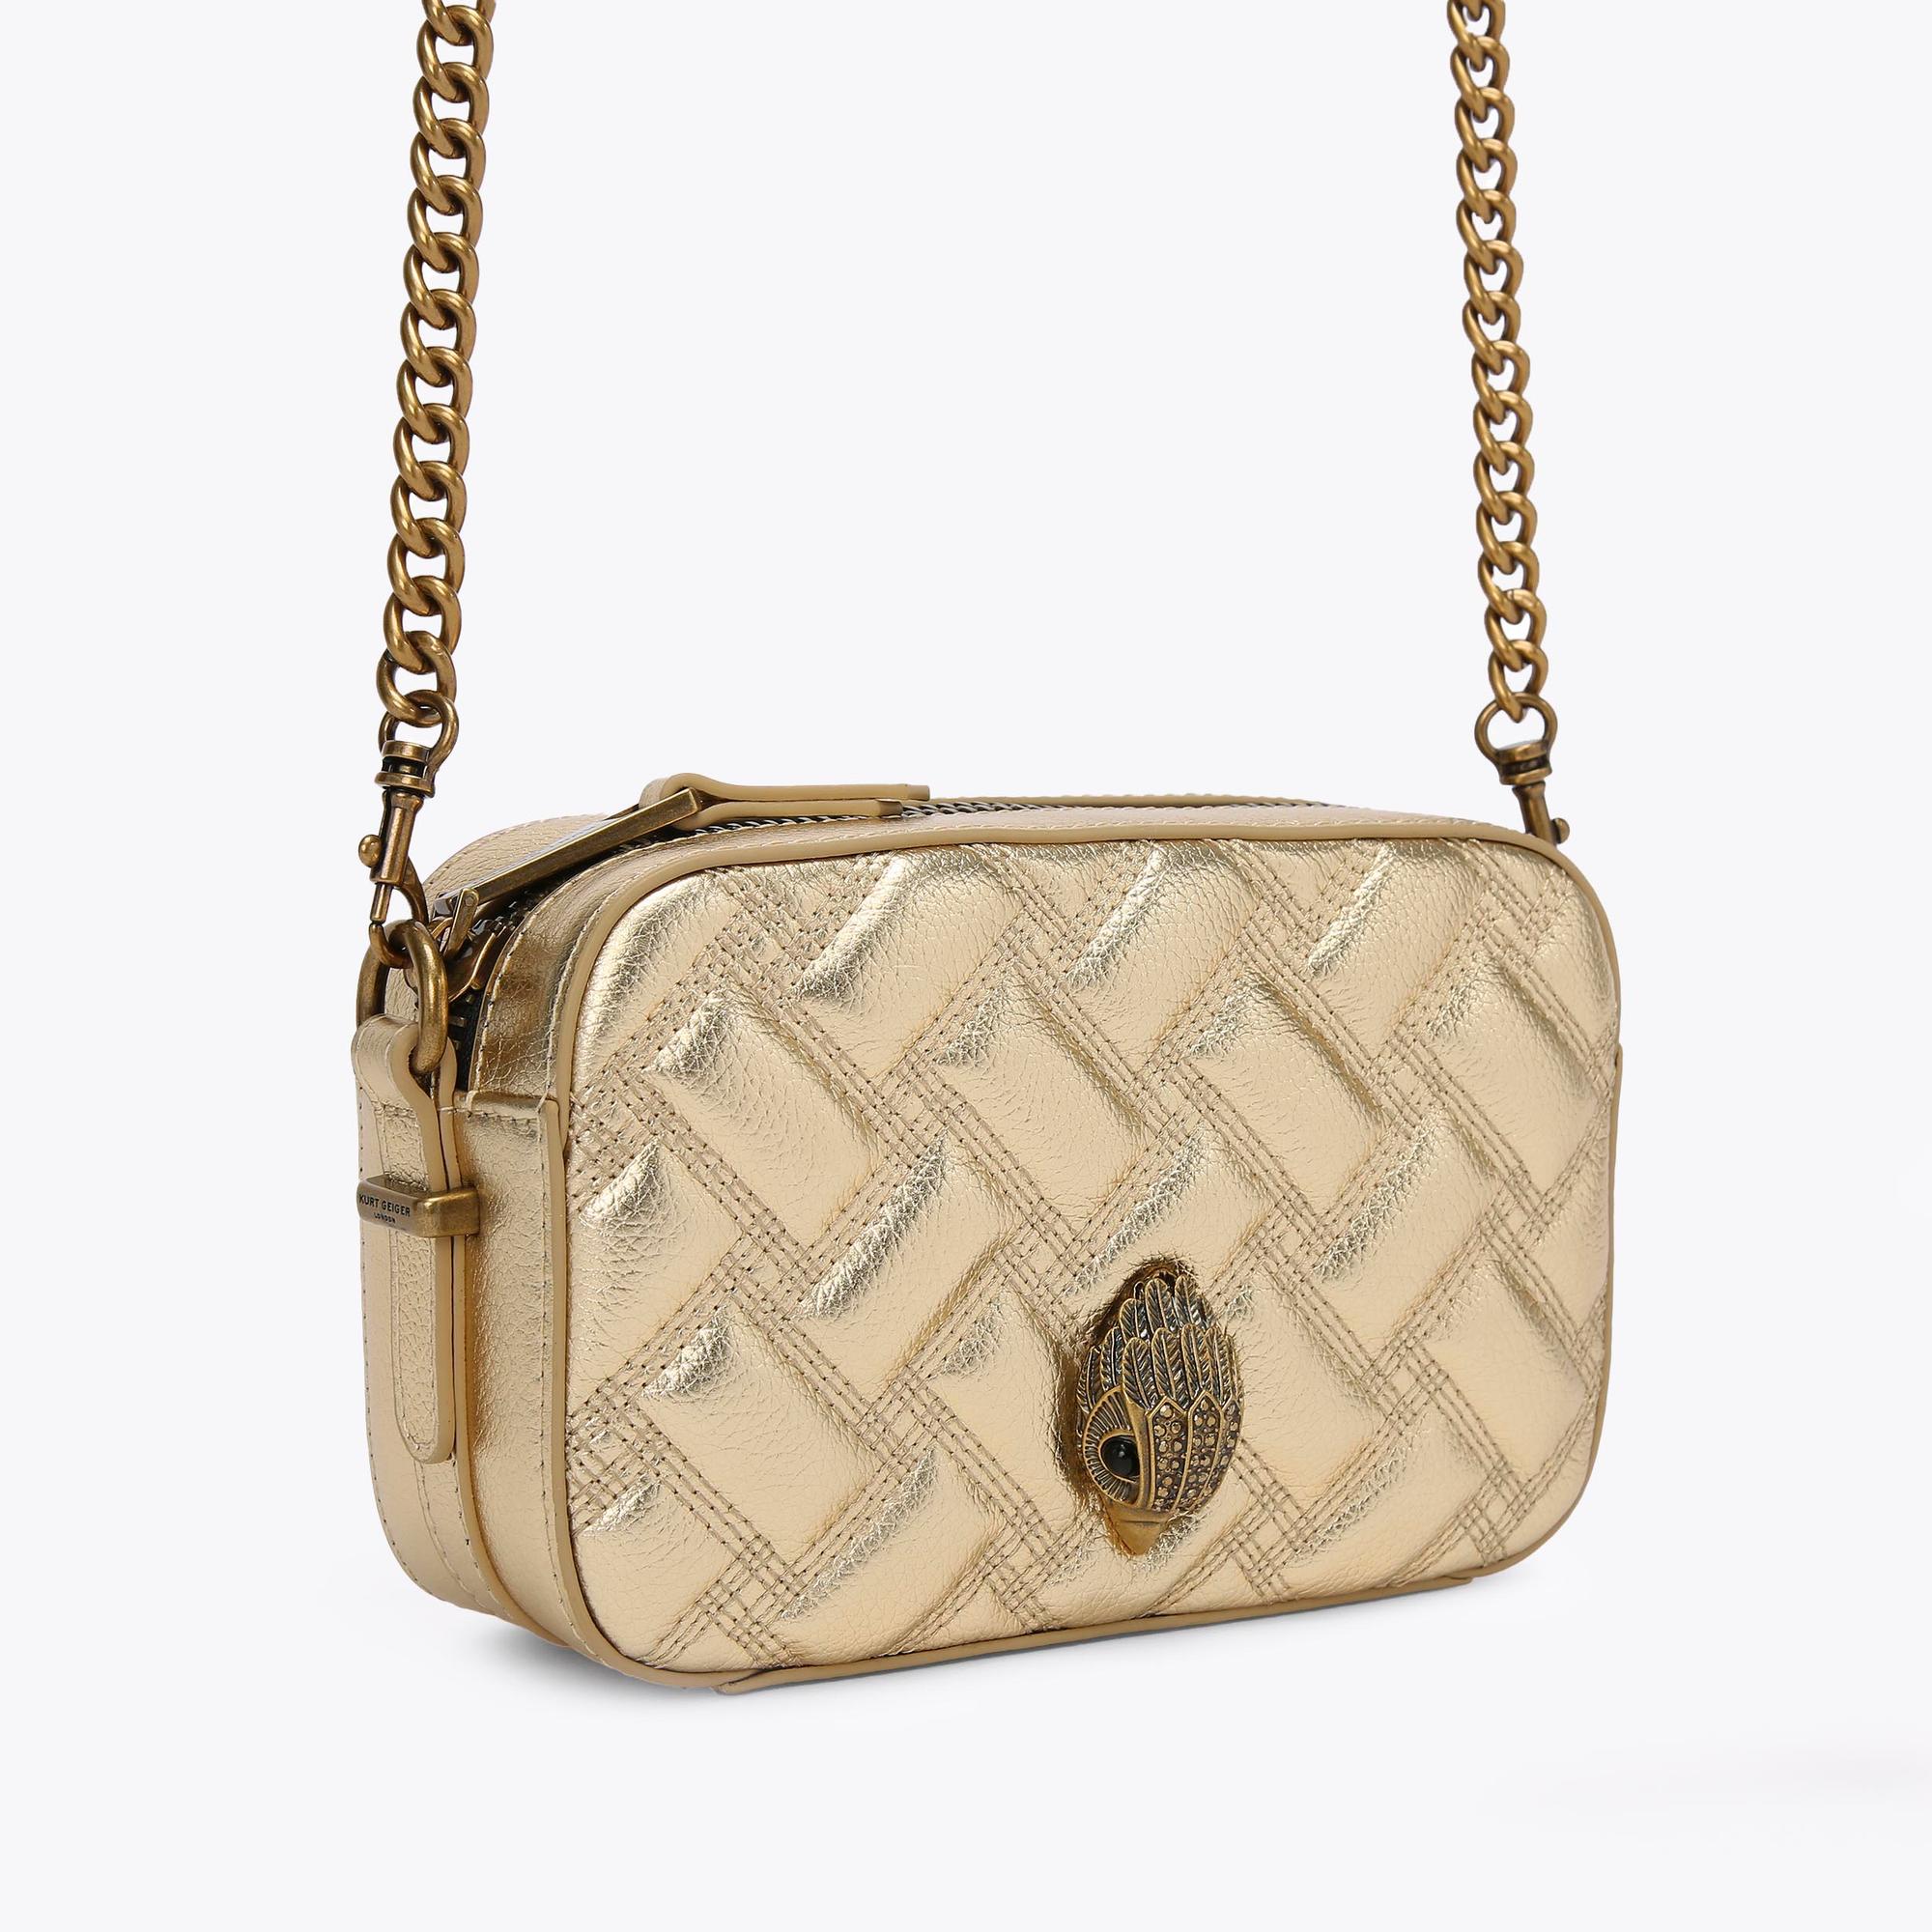 Kurt Geiger London Kensington Drench Quilted Leather Small Camera